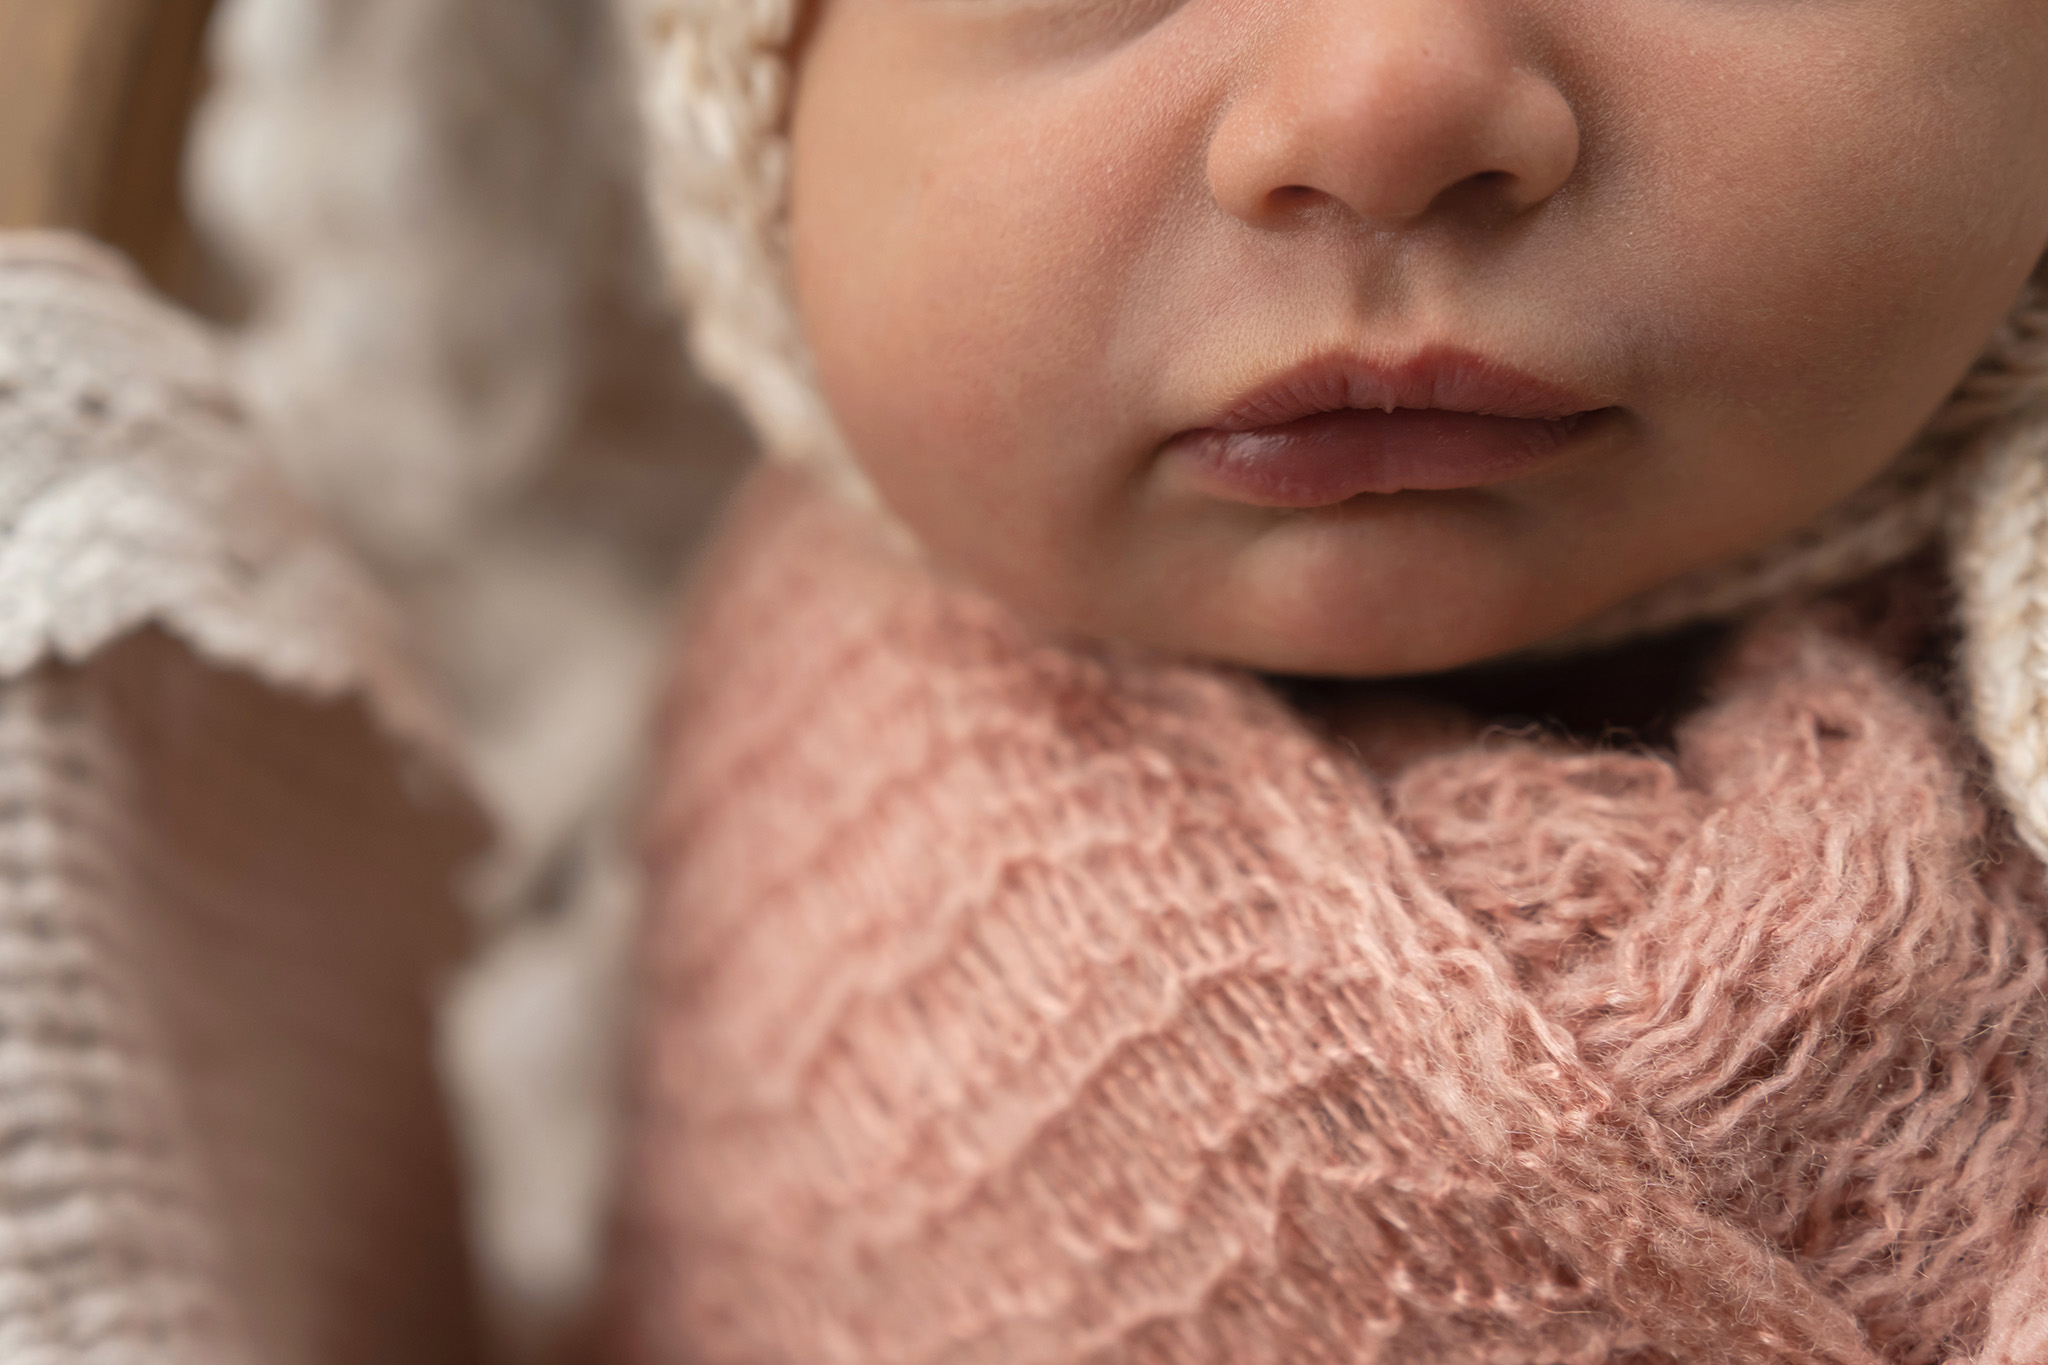 NJ In Home Newborn Photographer captures tiny details of baby